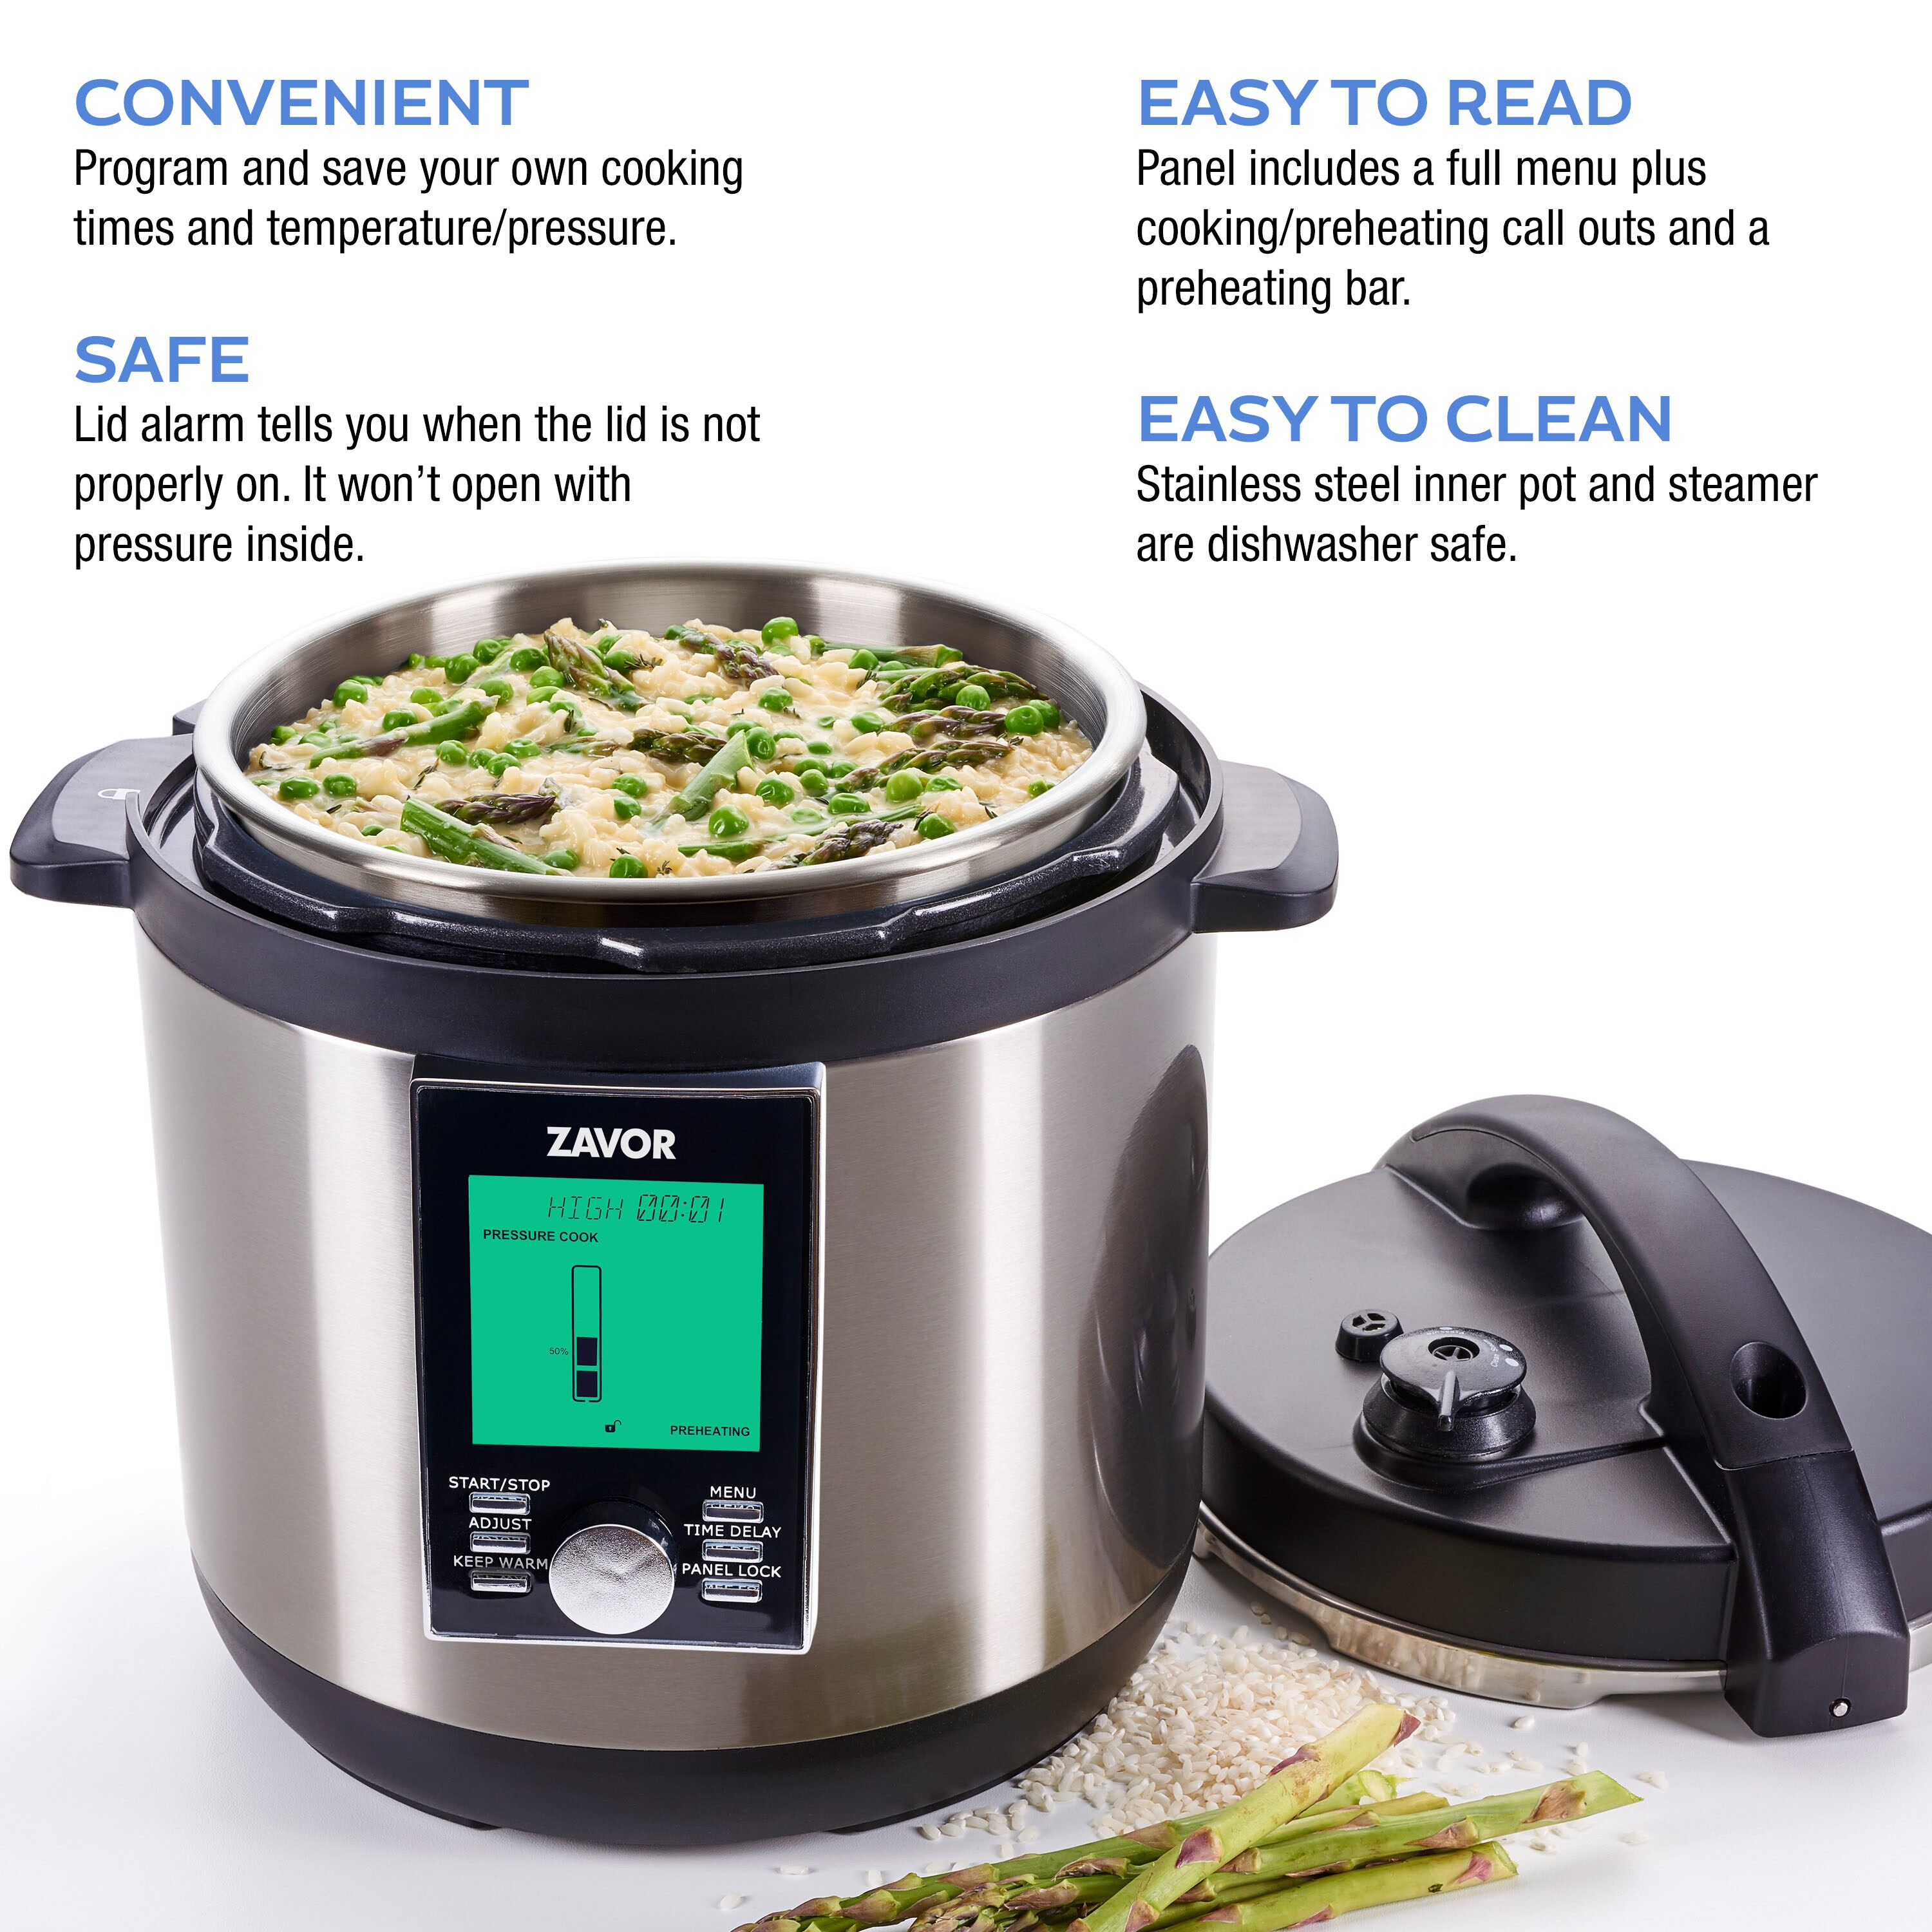 Kitchen Deluxe Vegetable Steamer Basket - Fits Instant Pot Pressure Cooker  3, 5, 6 Qt & 8 Quart - 100% Stainless Steel - Accessories Include Safety